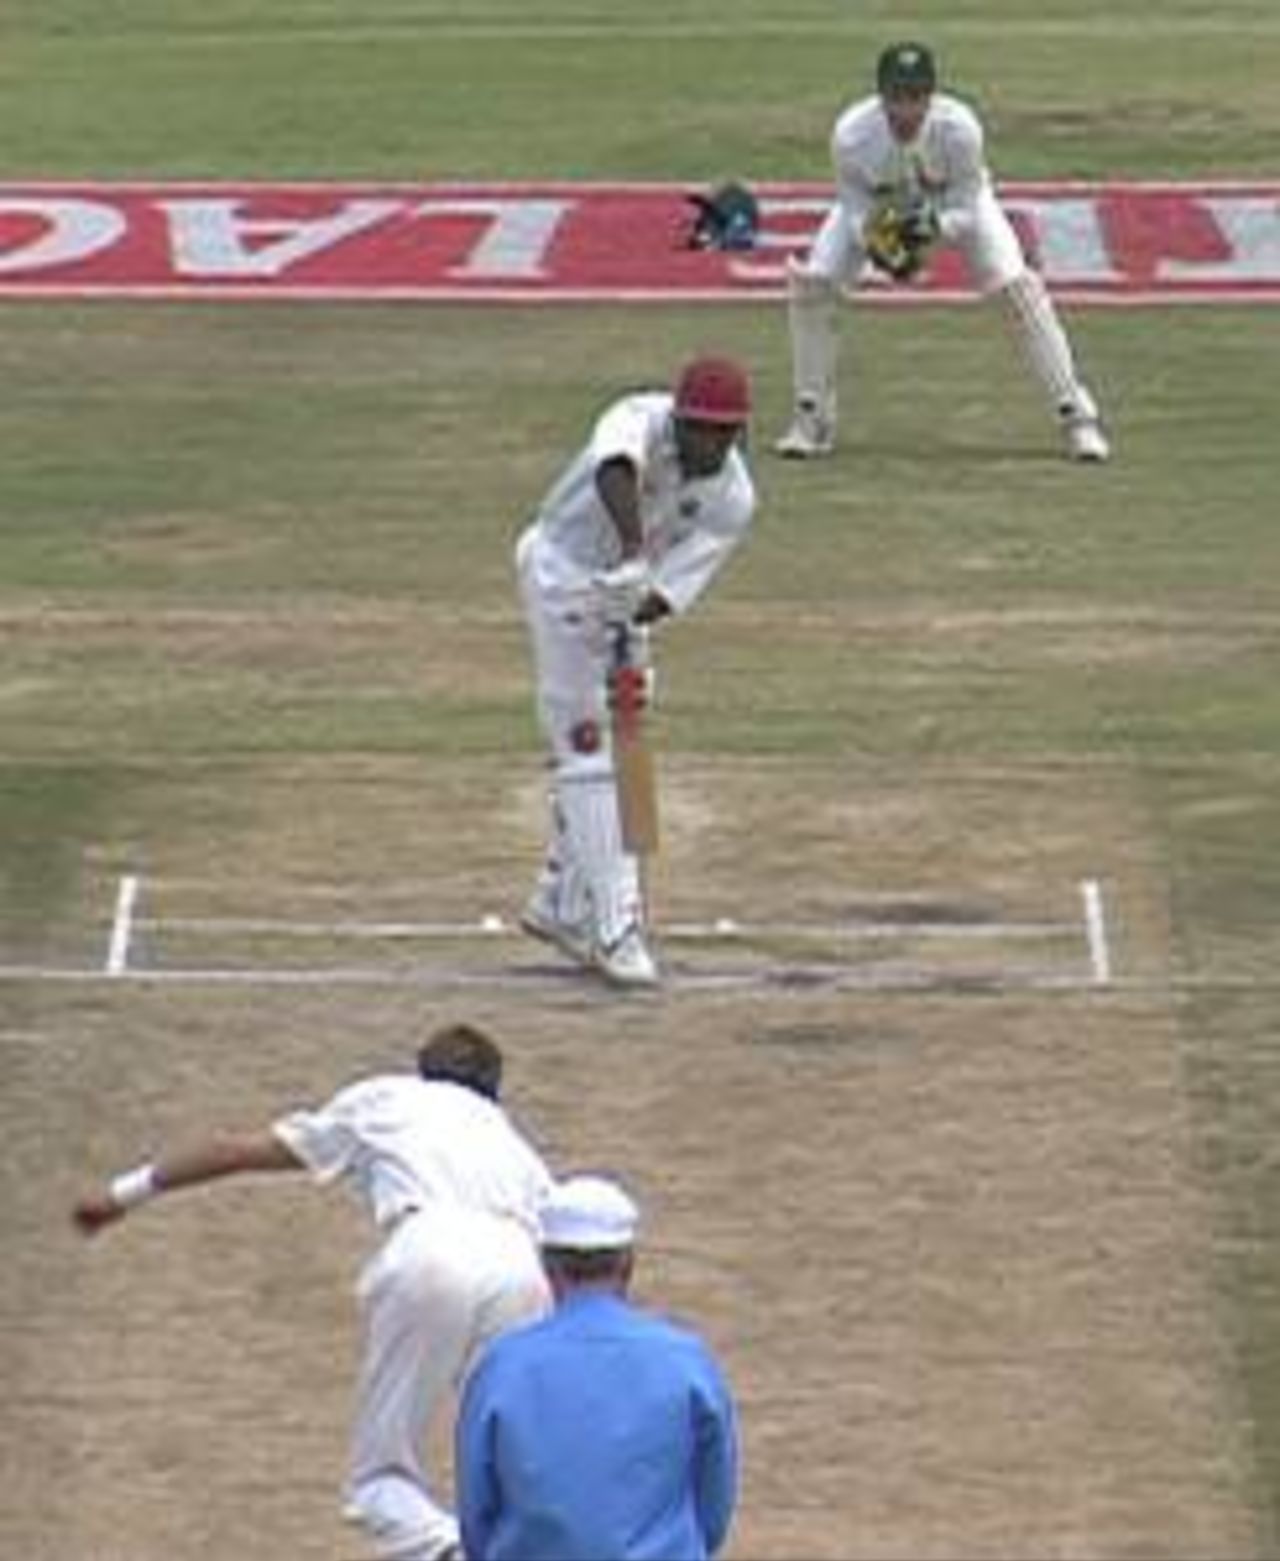 West Indies A wicketkeeper Ricky Hoyte is trapped lbw by South Africa A's Piet Botha for 0 during the second "Test" at Buffalo Park, East London, 19-22 Dec 1997.